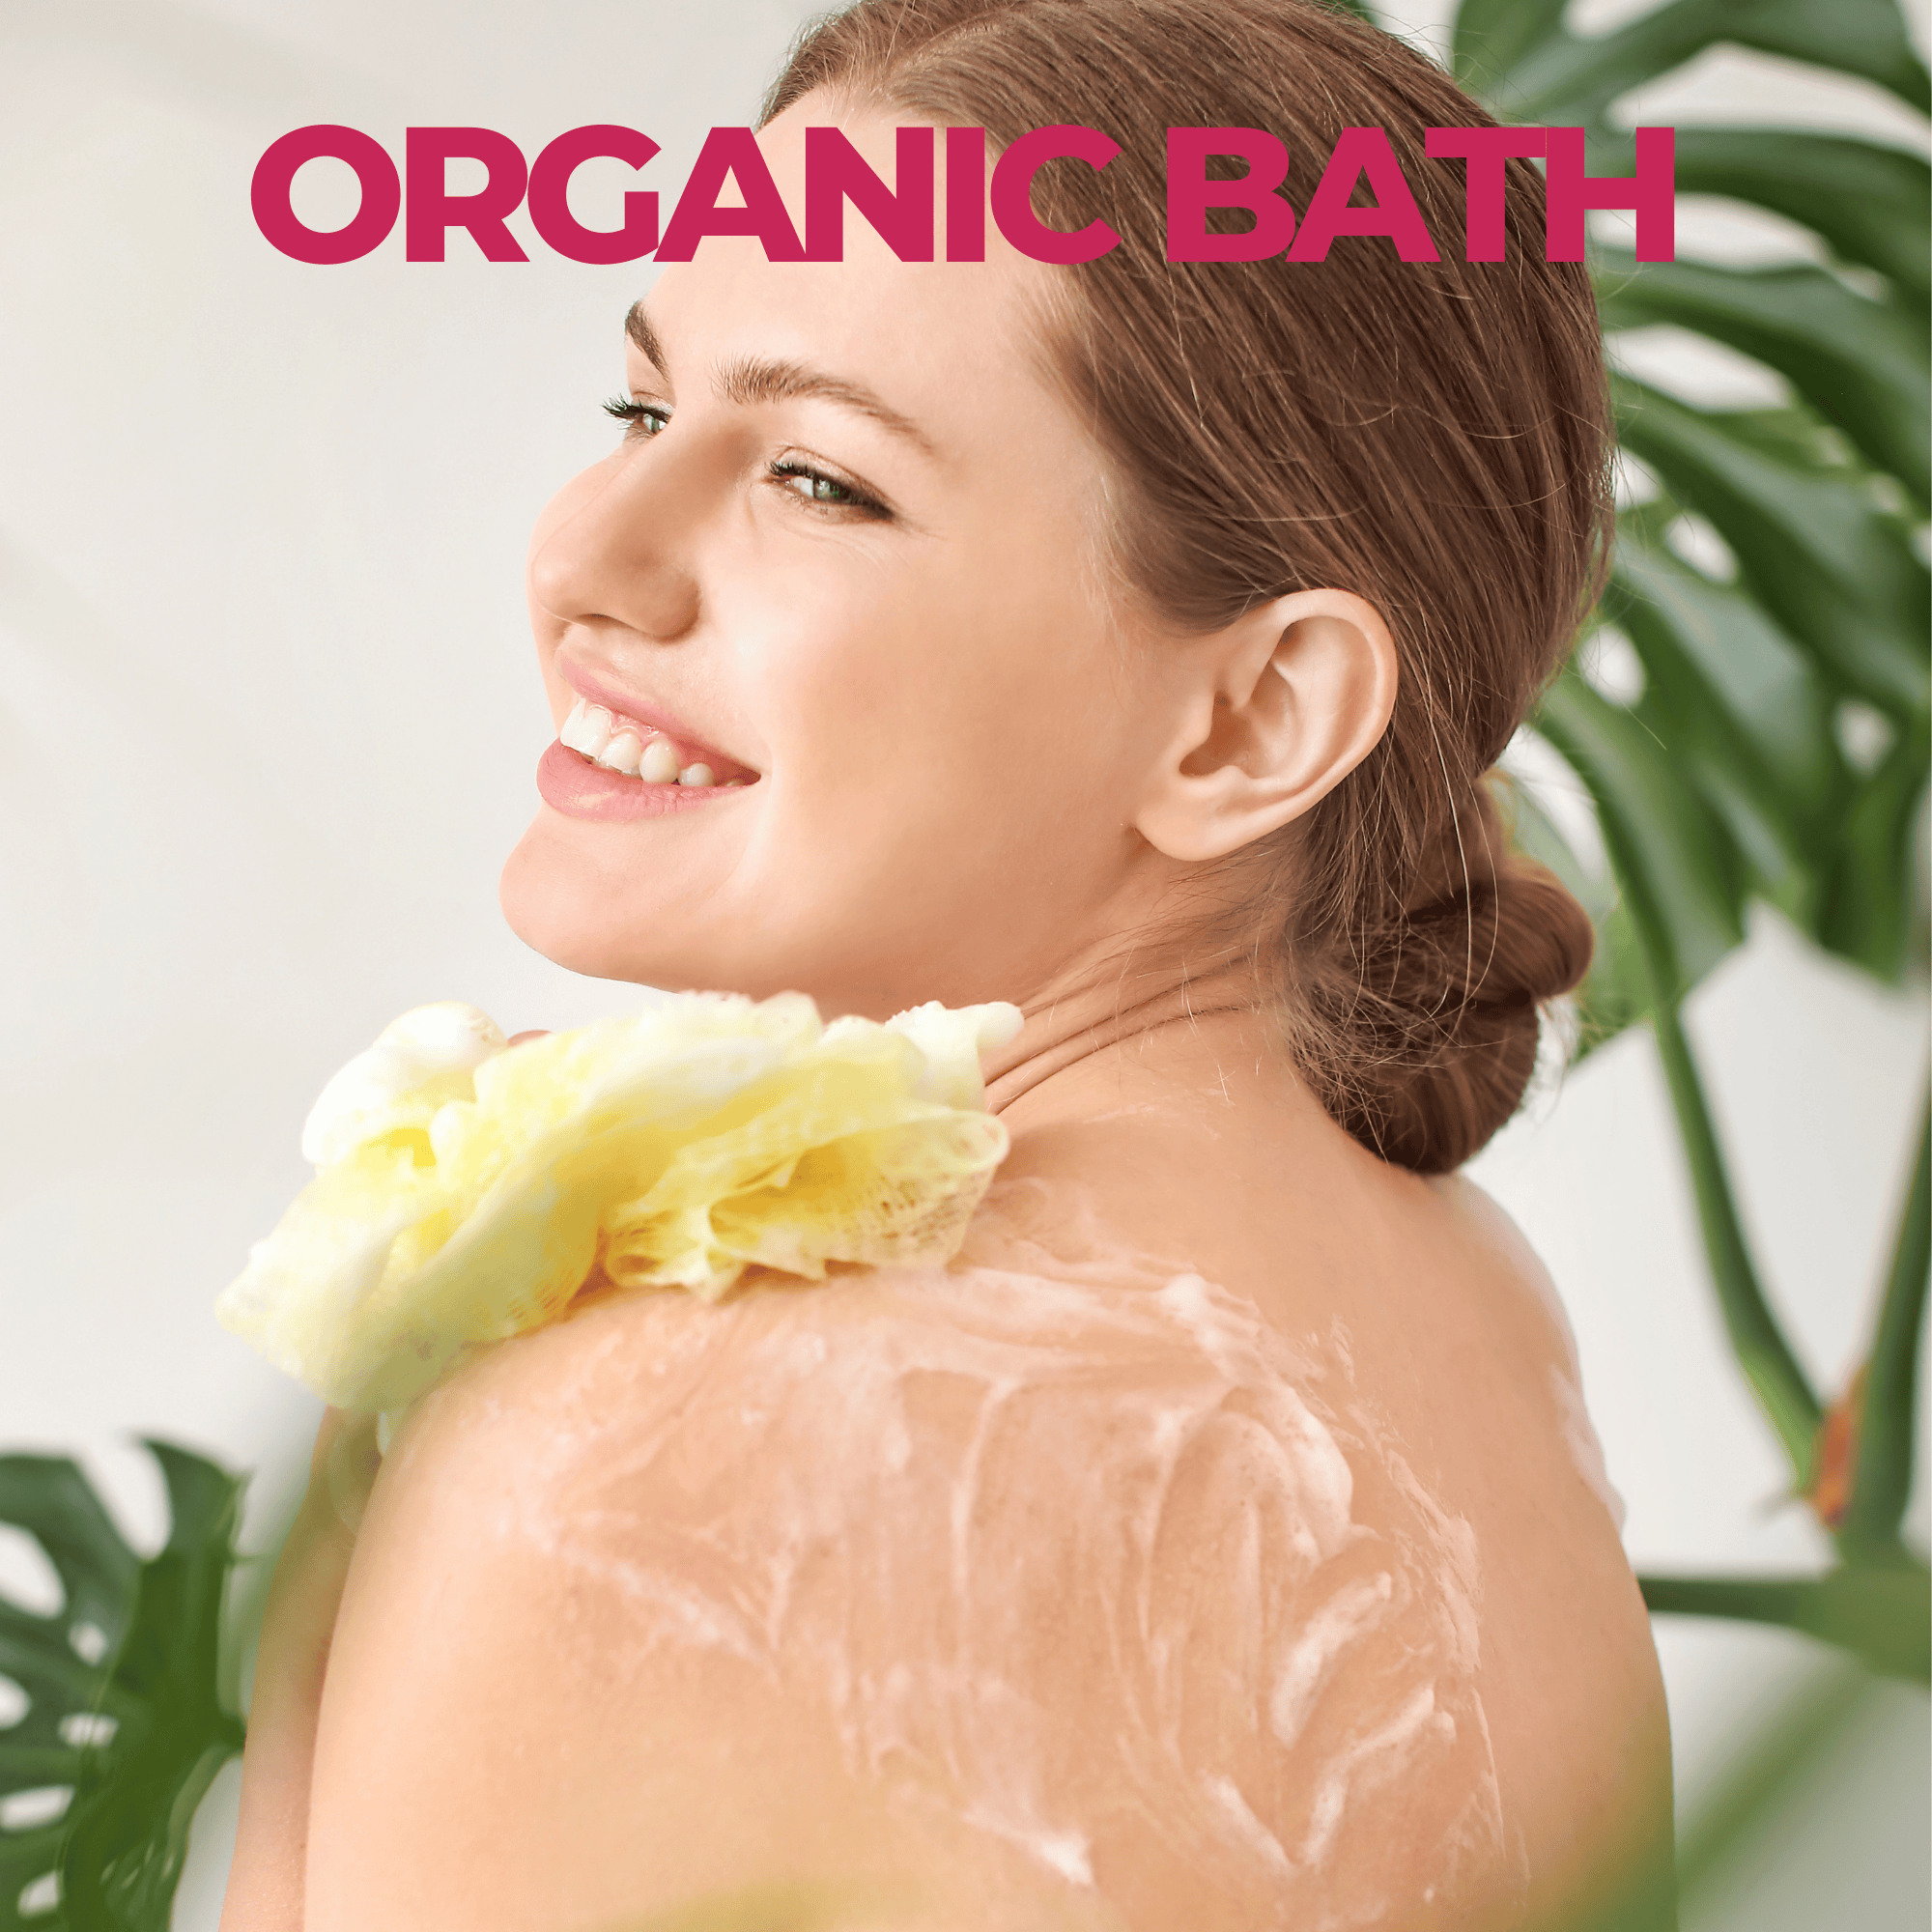 Top 8 Reasons Why You Should Invest in Organic Bath Products